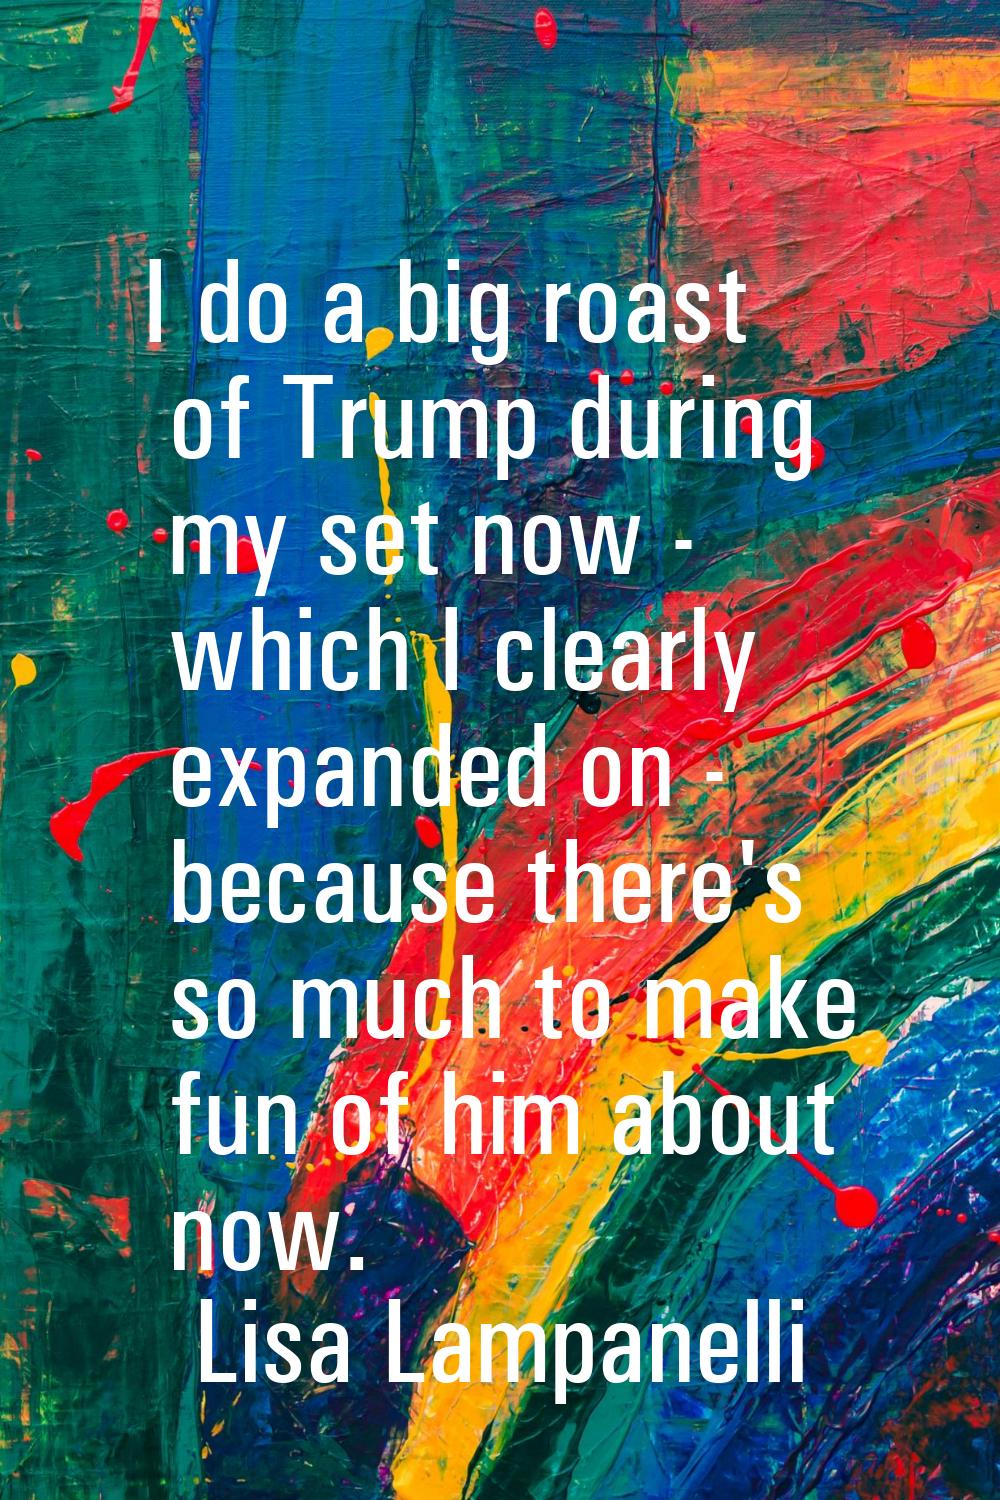 I do a big roast of Trump during my set now - which I clearly expanded on - because there's so much